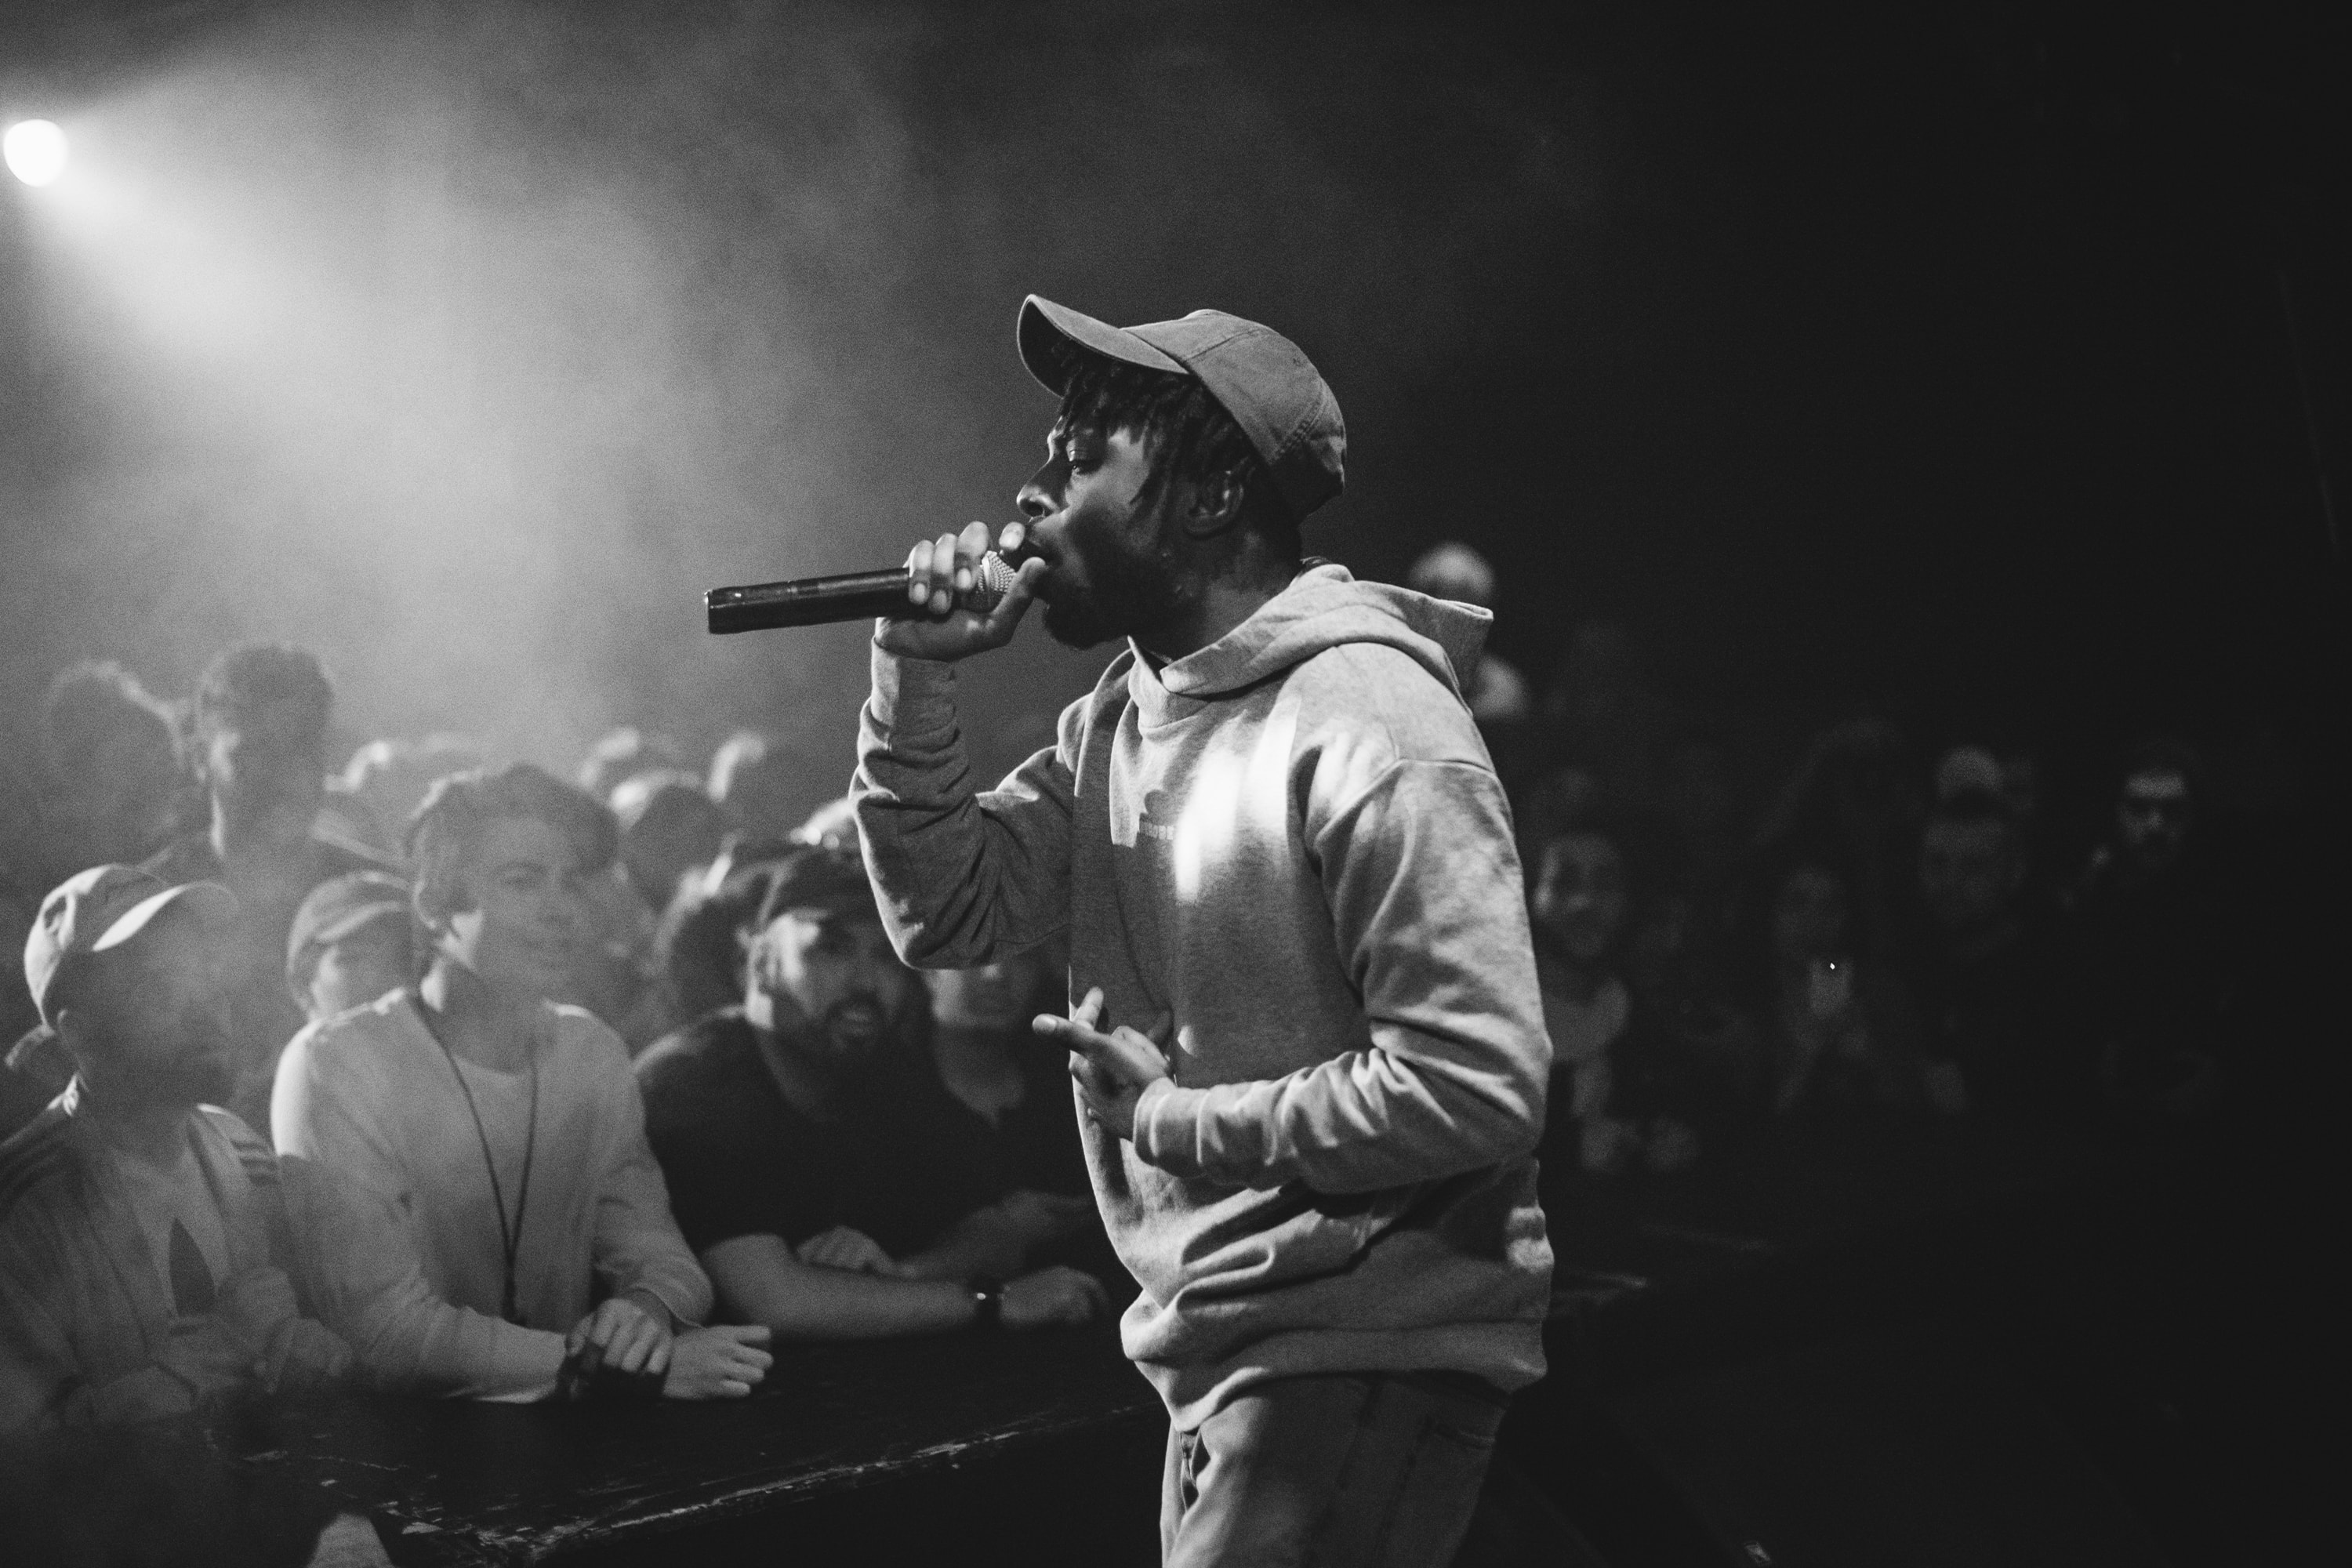 Lil Sunny Tour: Photo Recap Isaiah Rashad Sold-Out Vancouver Show Canada Fortune Sound Club TDE Kendrick Lamar The Heart Part 4